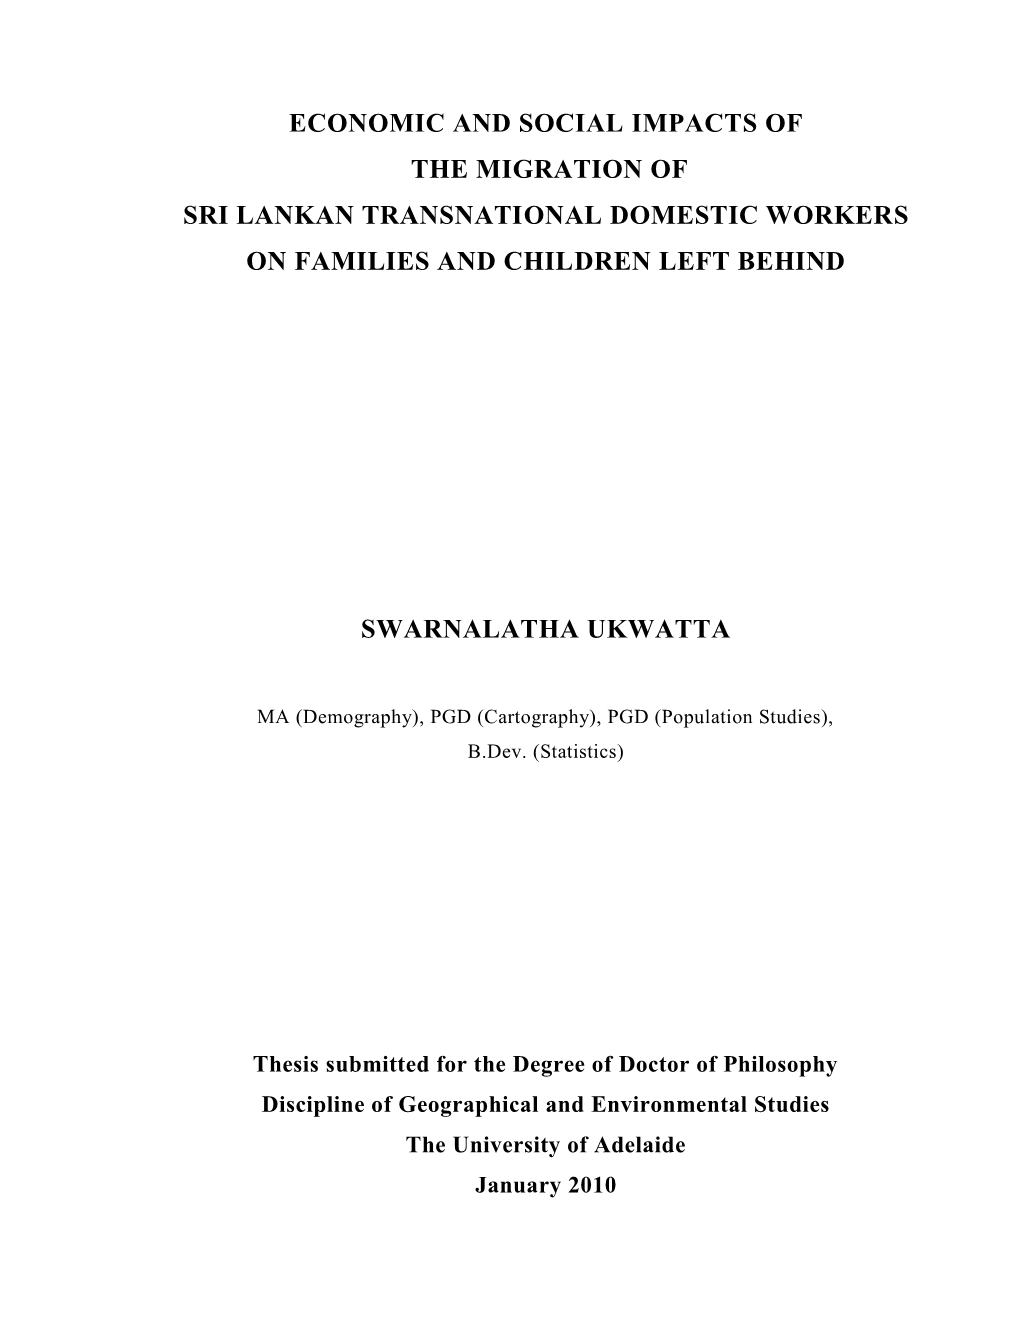 Economic and Social Impacts of the Migration of Sri Lankan Transnational Domestic Workers on Families and Children Left Behind